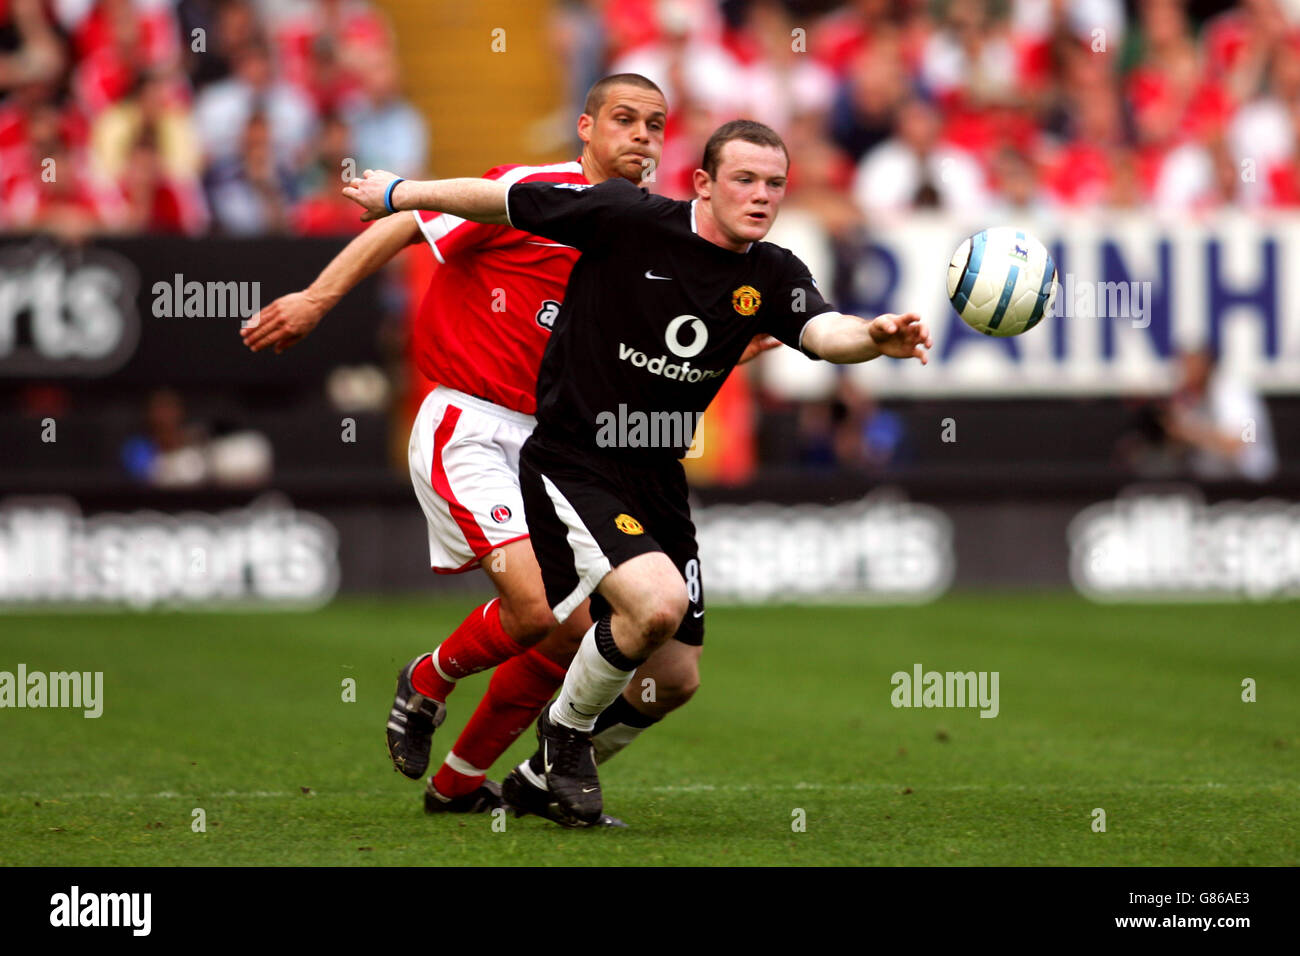 Soccer - FA Barclays Premiership - Charlton Athletic v Manchester United - The Valley. Charlton Athletic's Luke Young and Manchester United's Wayne Rooney battle for the ball Stock Photo